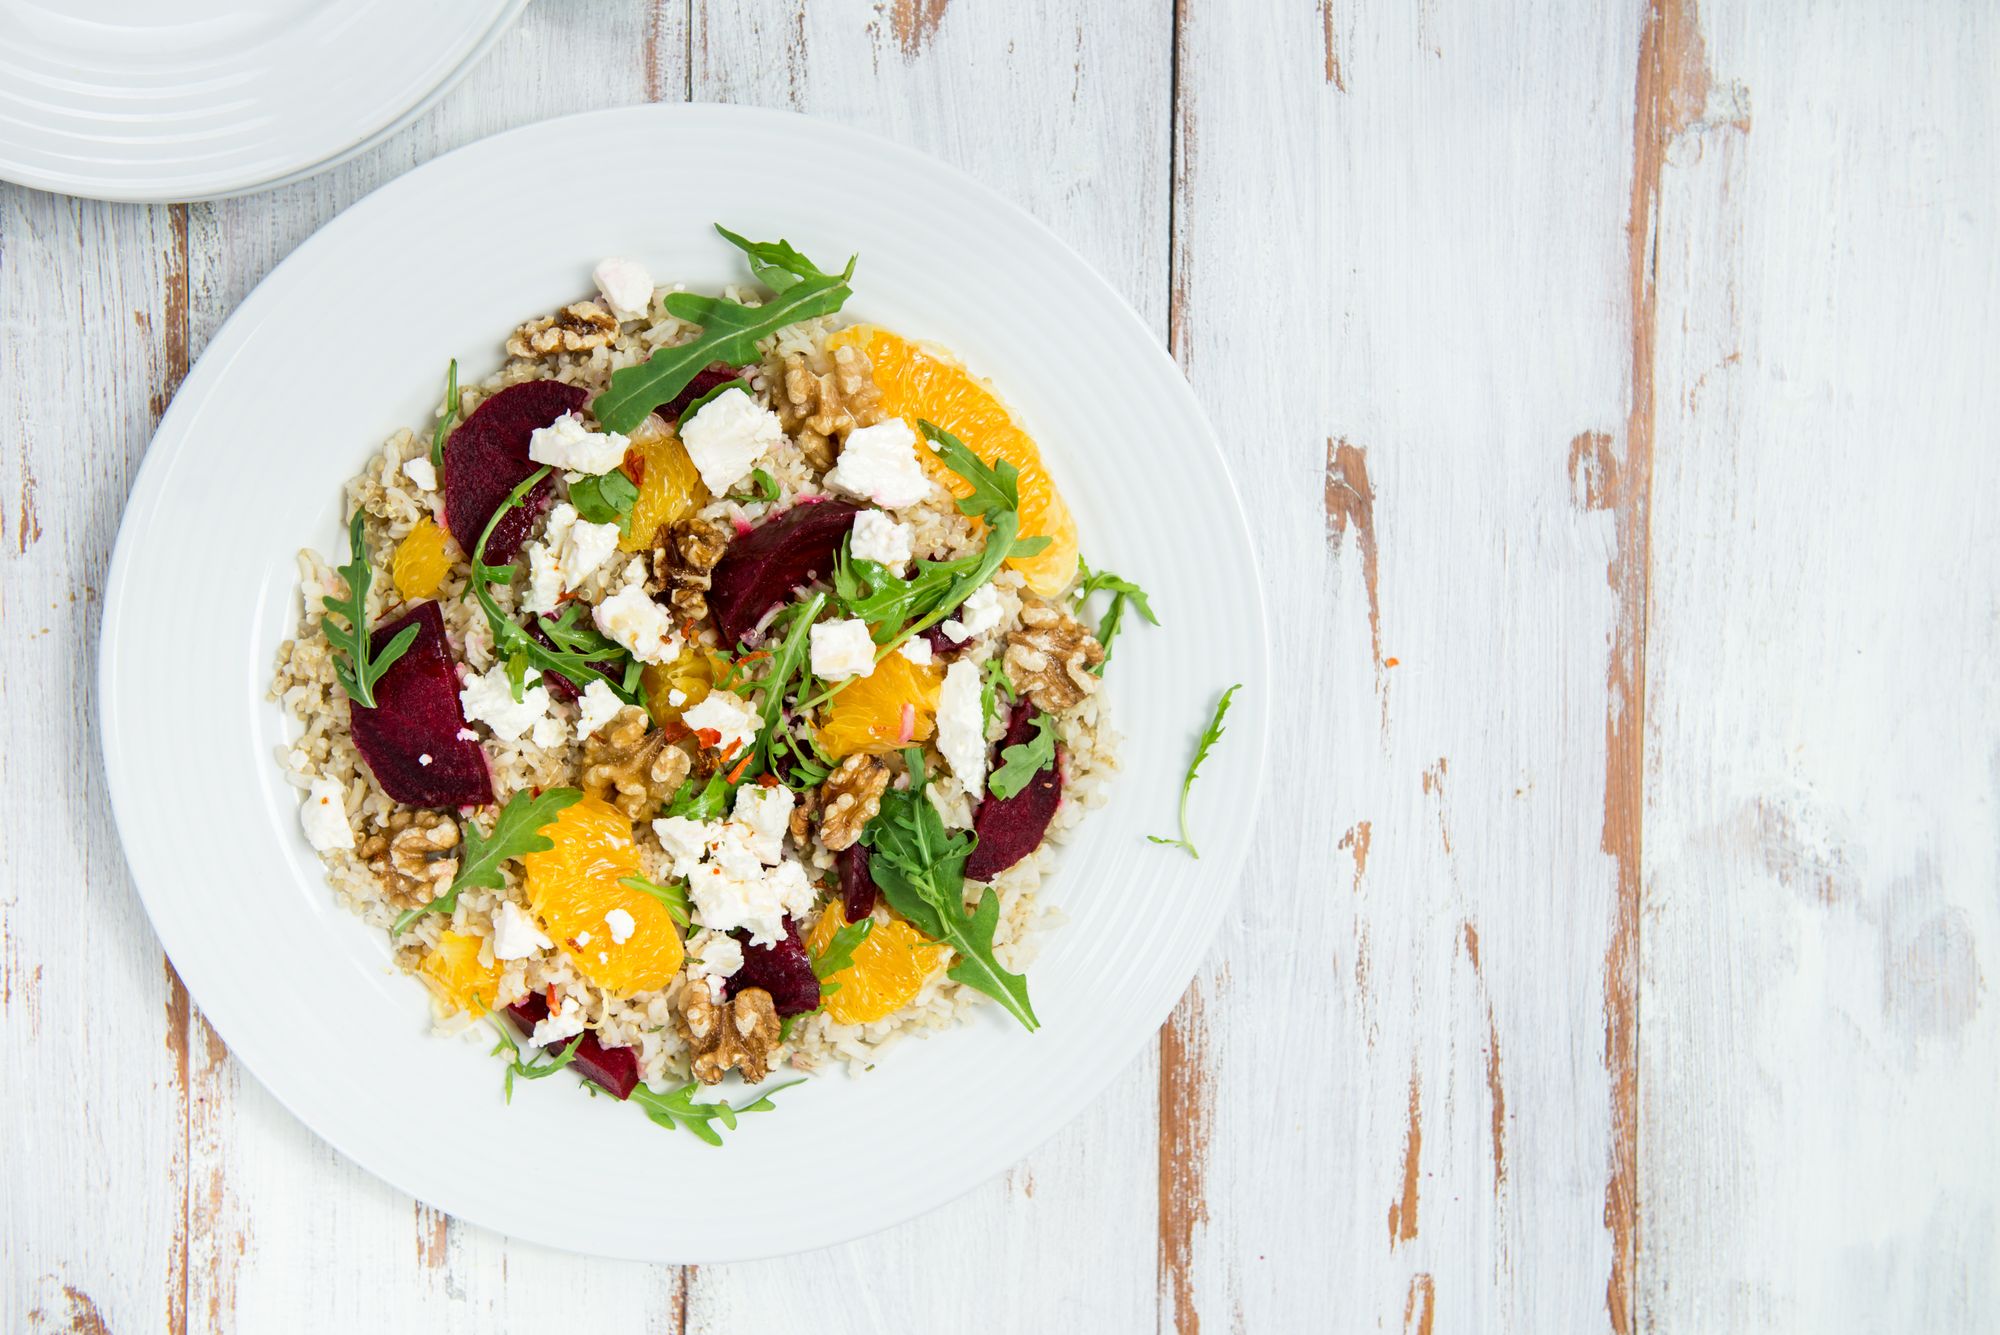 Beetroot, Walnut and Goats’ Cheese Salad